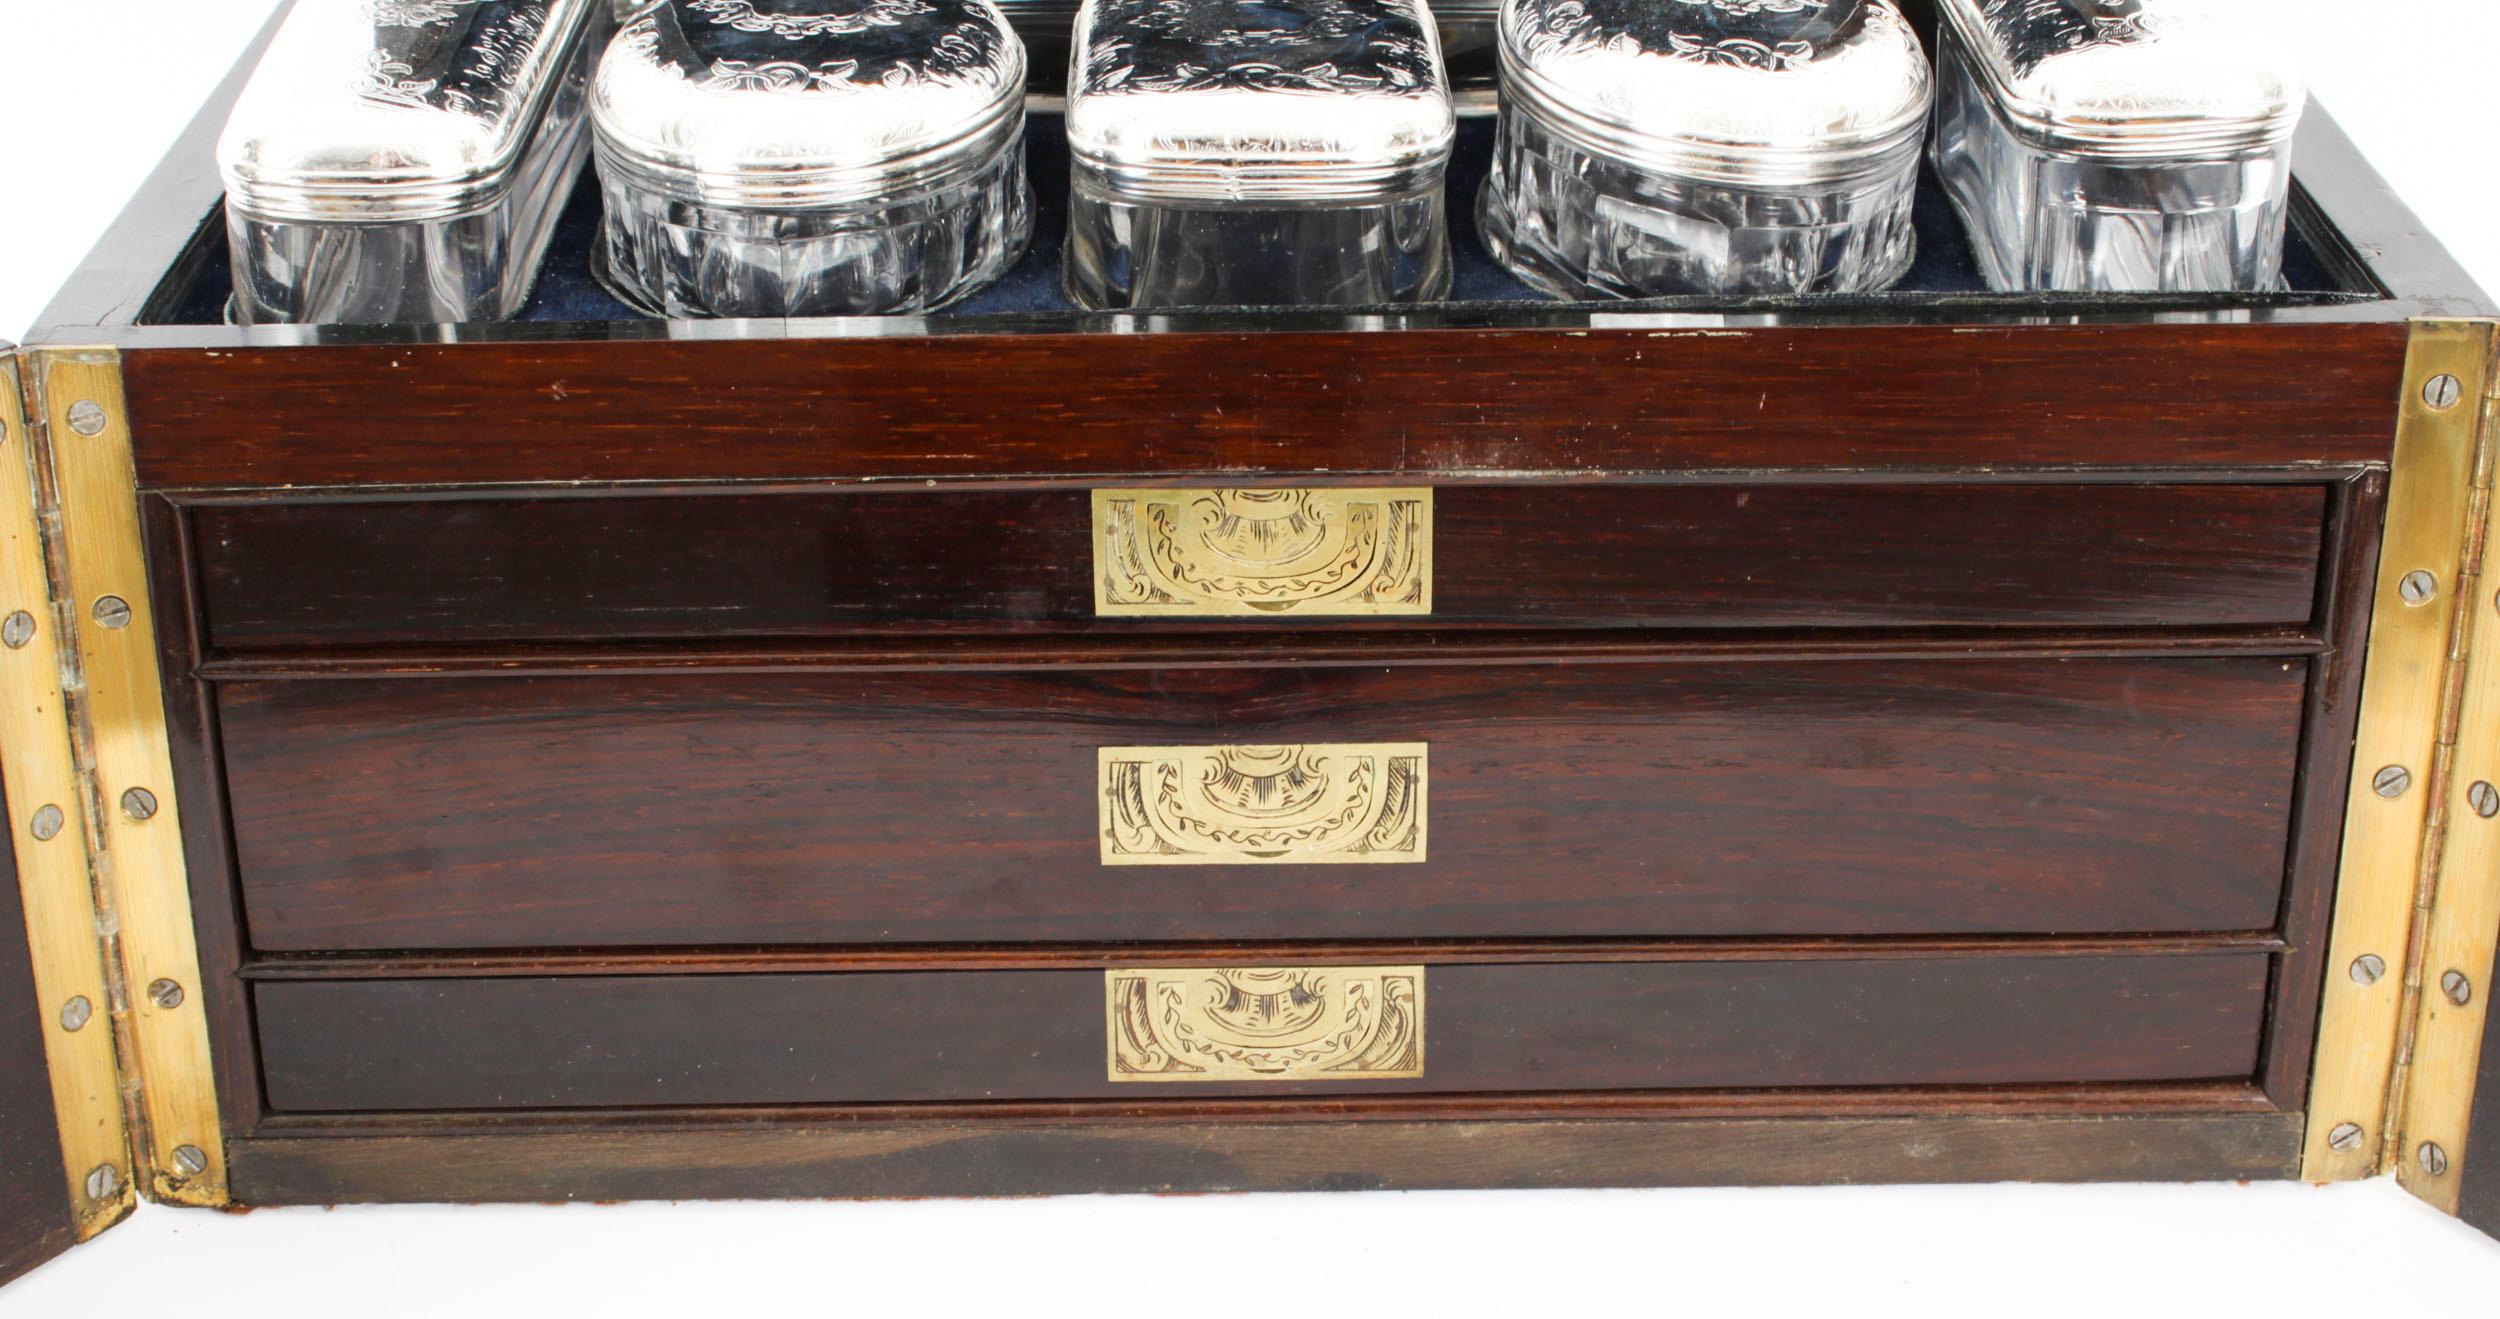 Antique Palais Royal French Casket Necessaire Vanity Chest by L. Dujat 19th C In Good Condition For Sale In London, GB